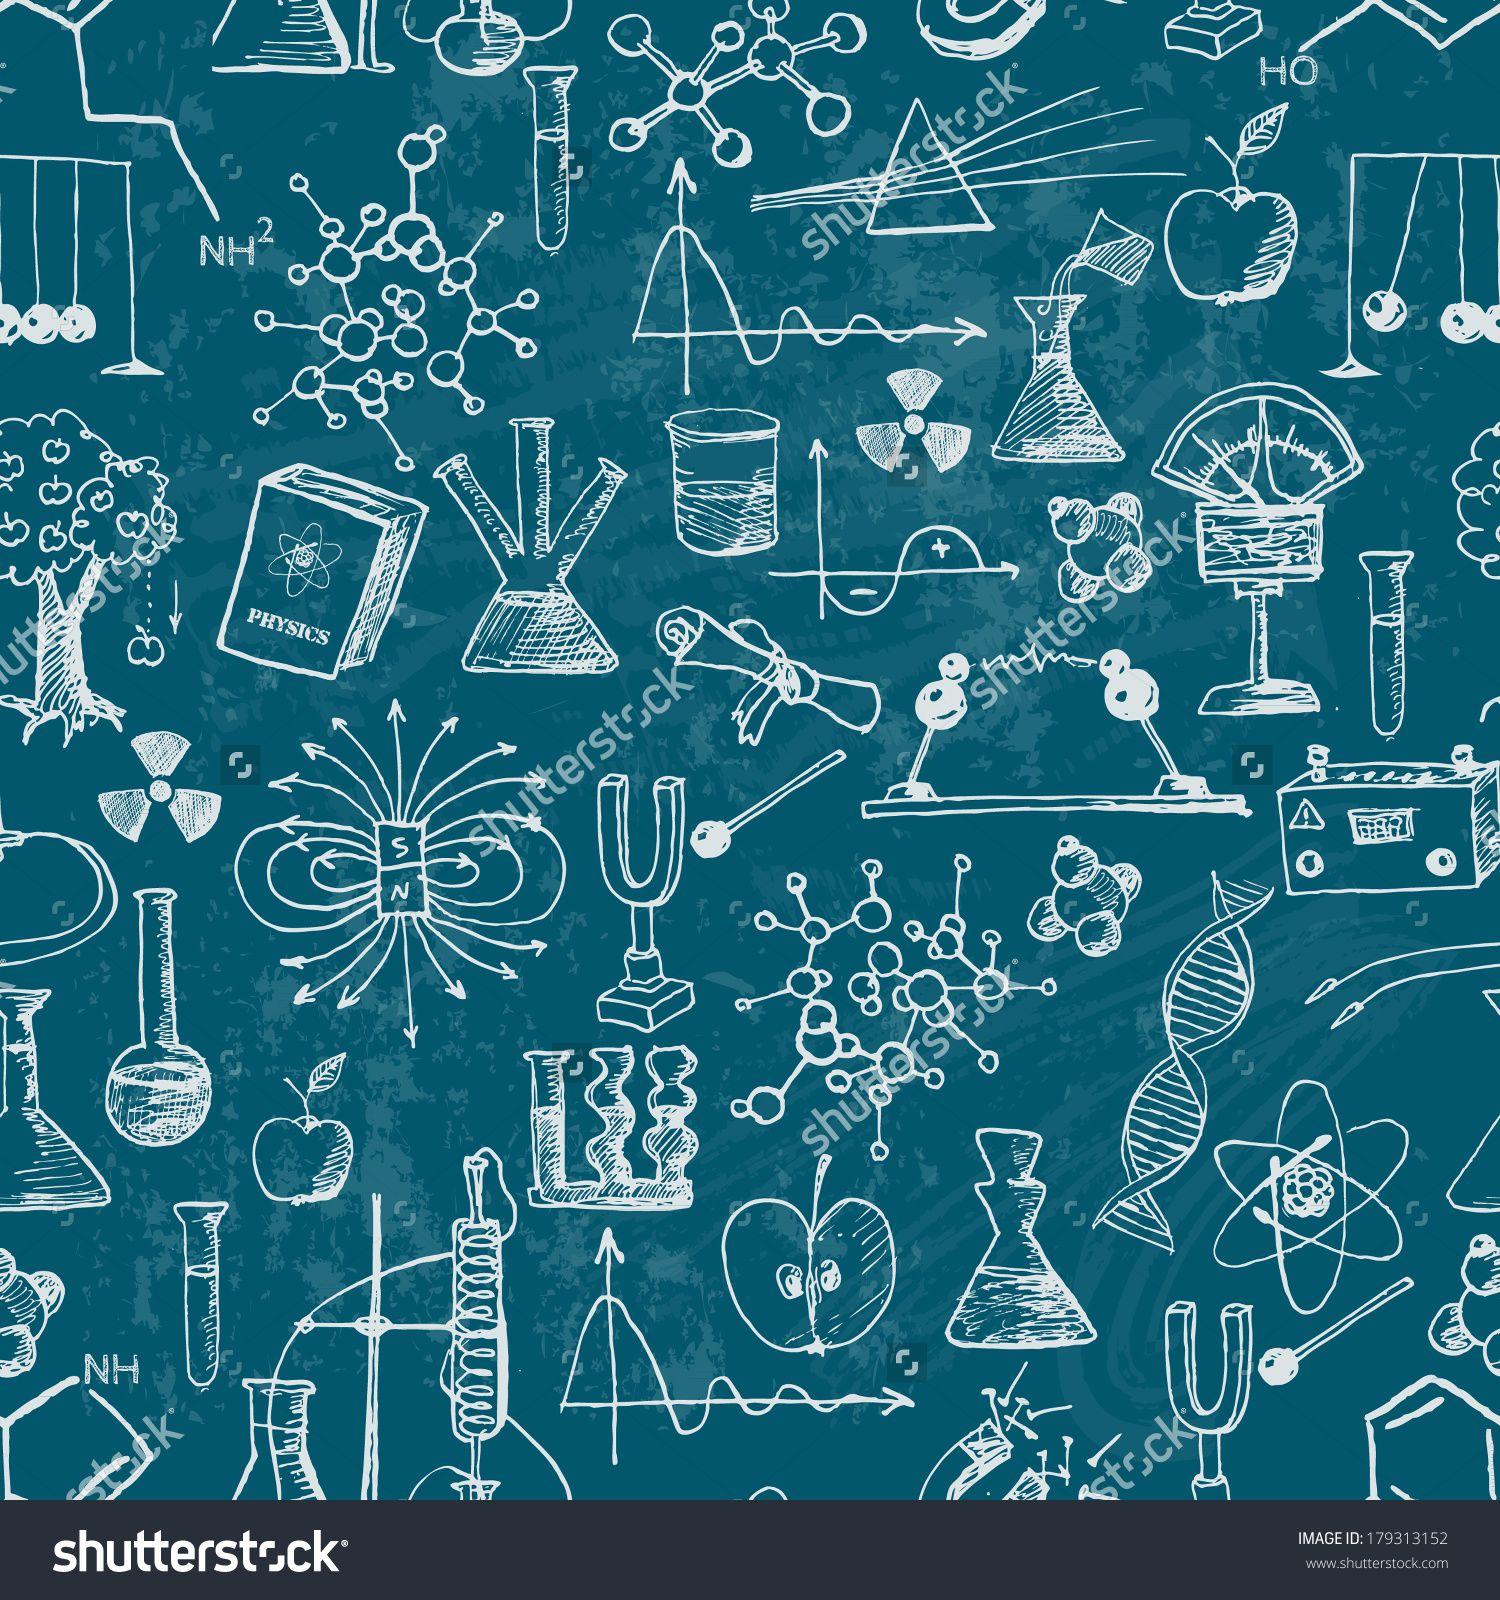 Wallpapers Chemistry - Wallpaper Cave